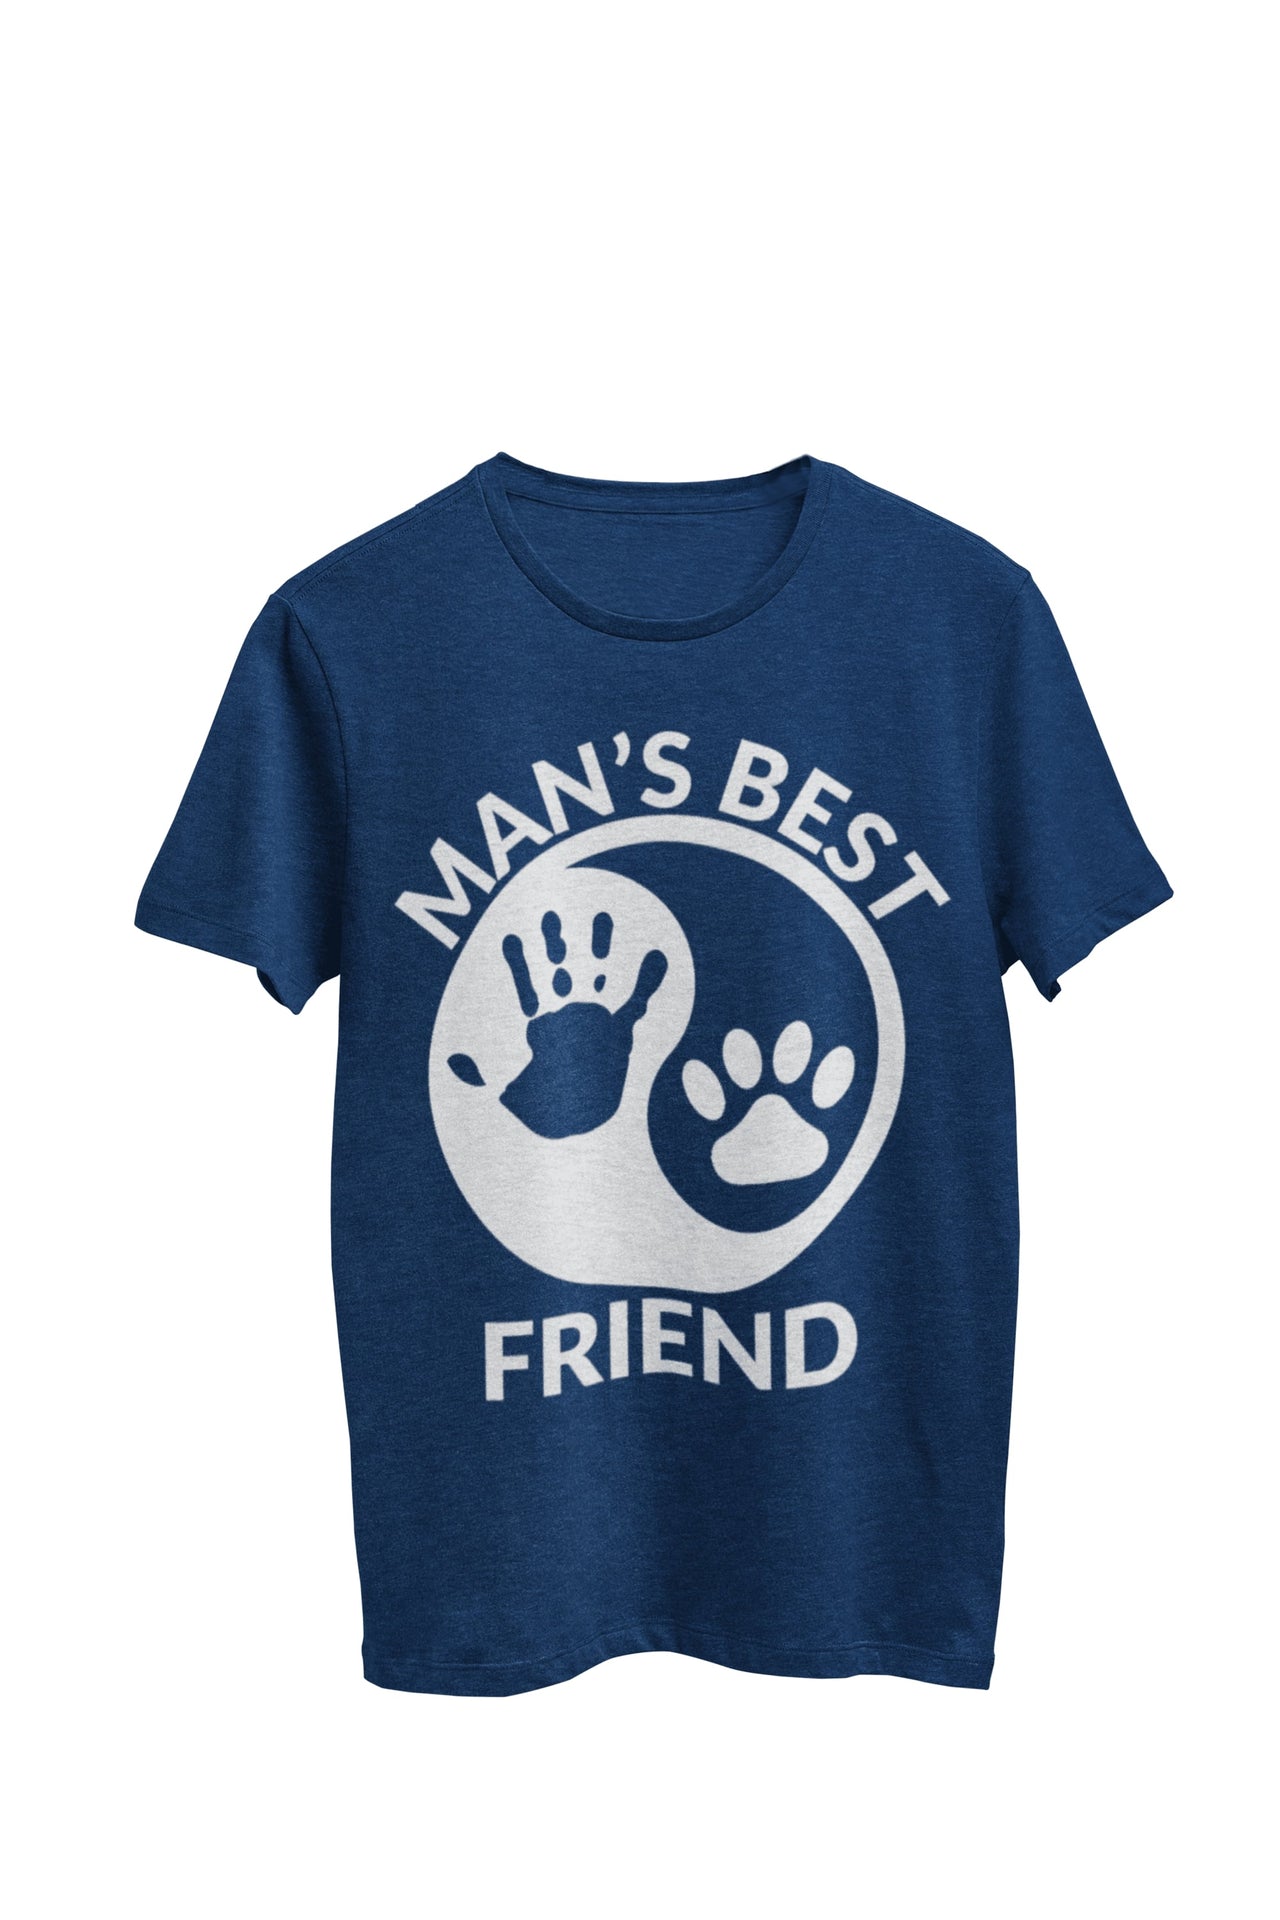 Navy Heather Unisex T-shirt with the text 'man's best friend,' depicting a yin yang symbol with a human handprint on one side and a paw print on the other. Designed by WooHoo Apparel.